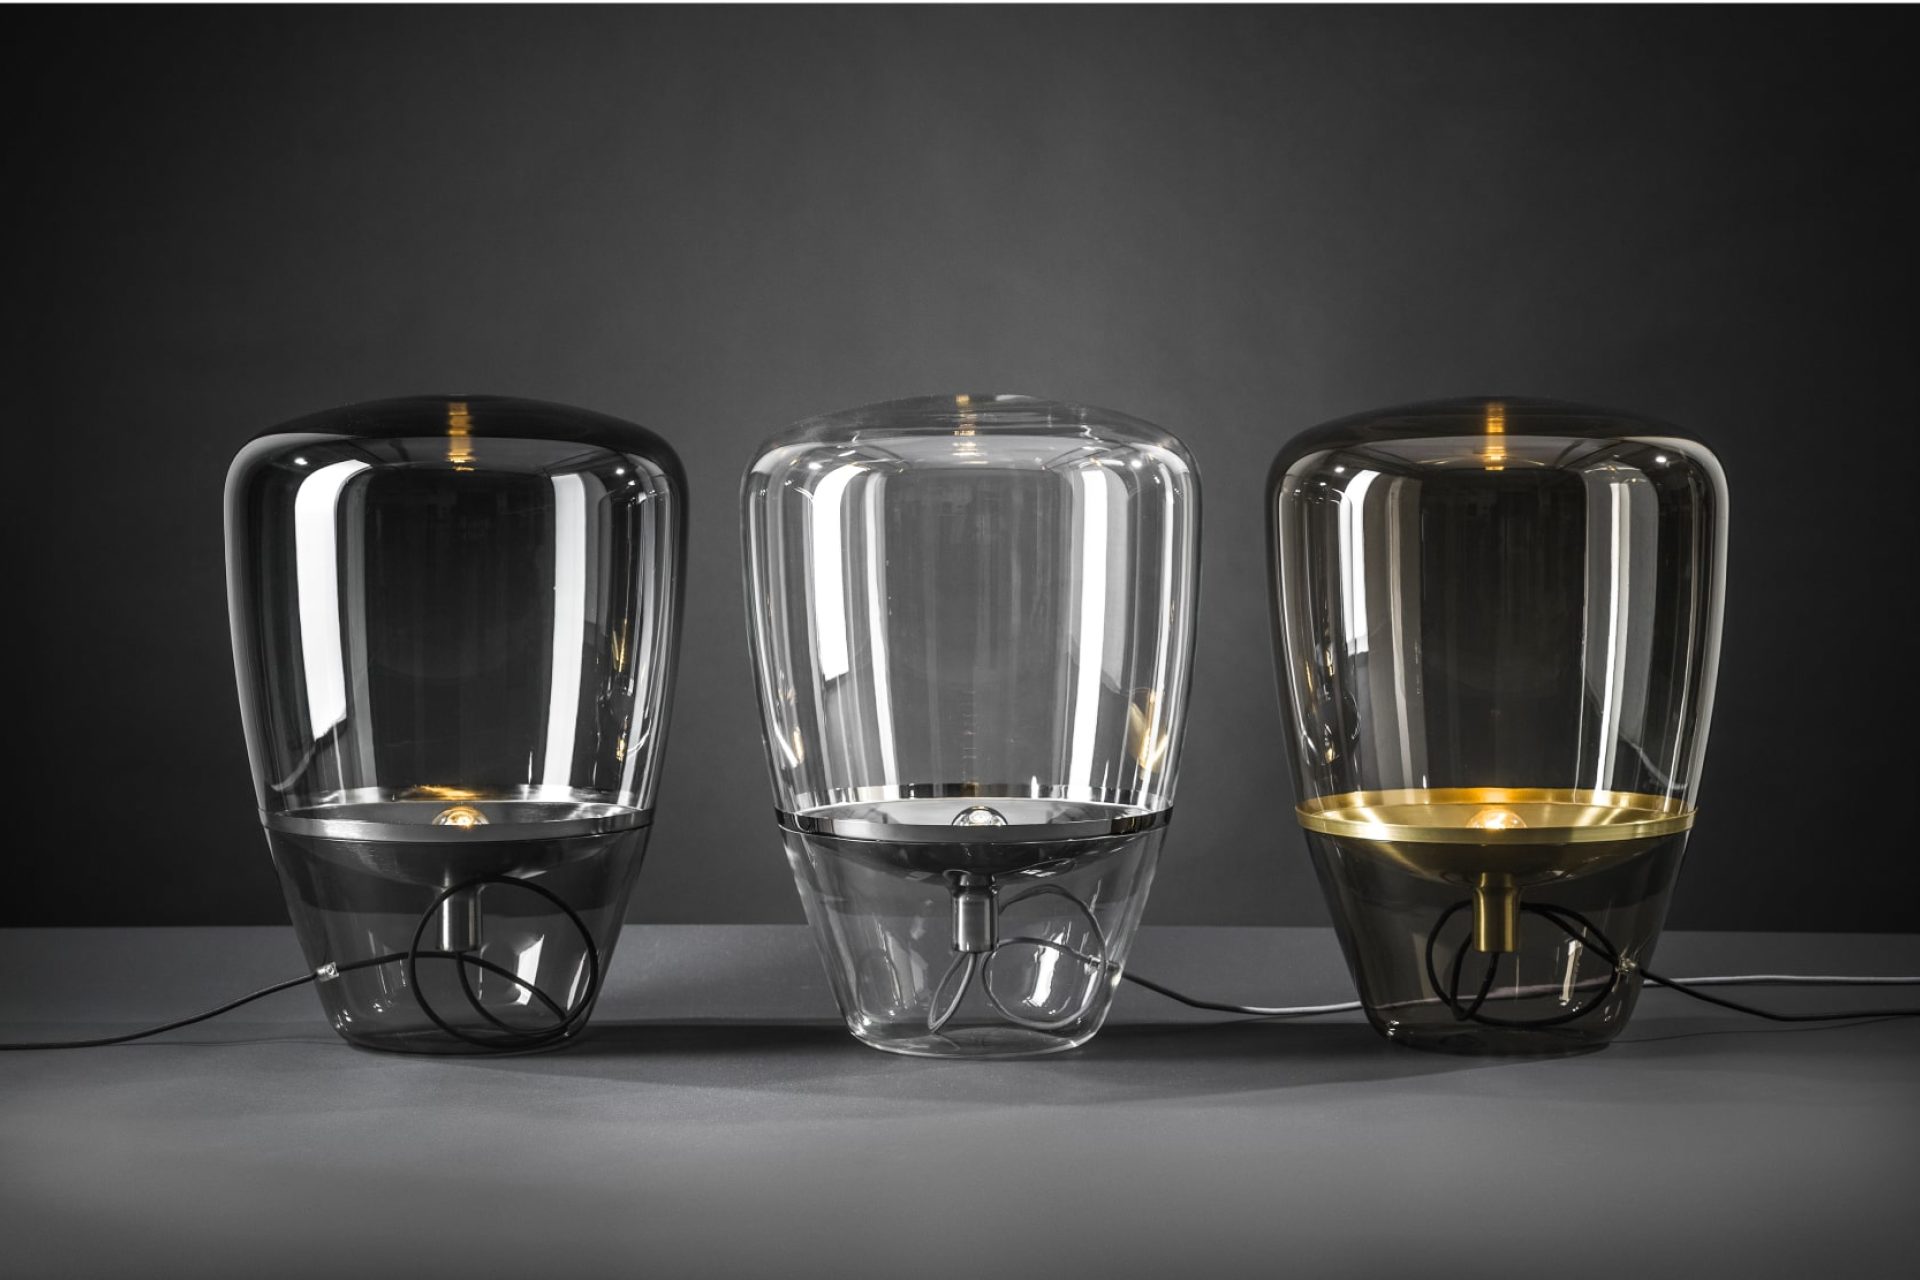 Three glass lamps, combining clear and smoked finishes and shaped like a hot air balloon